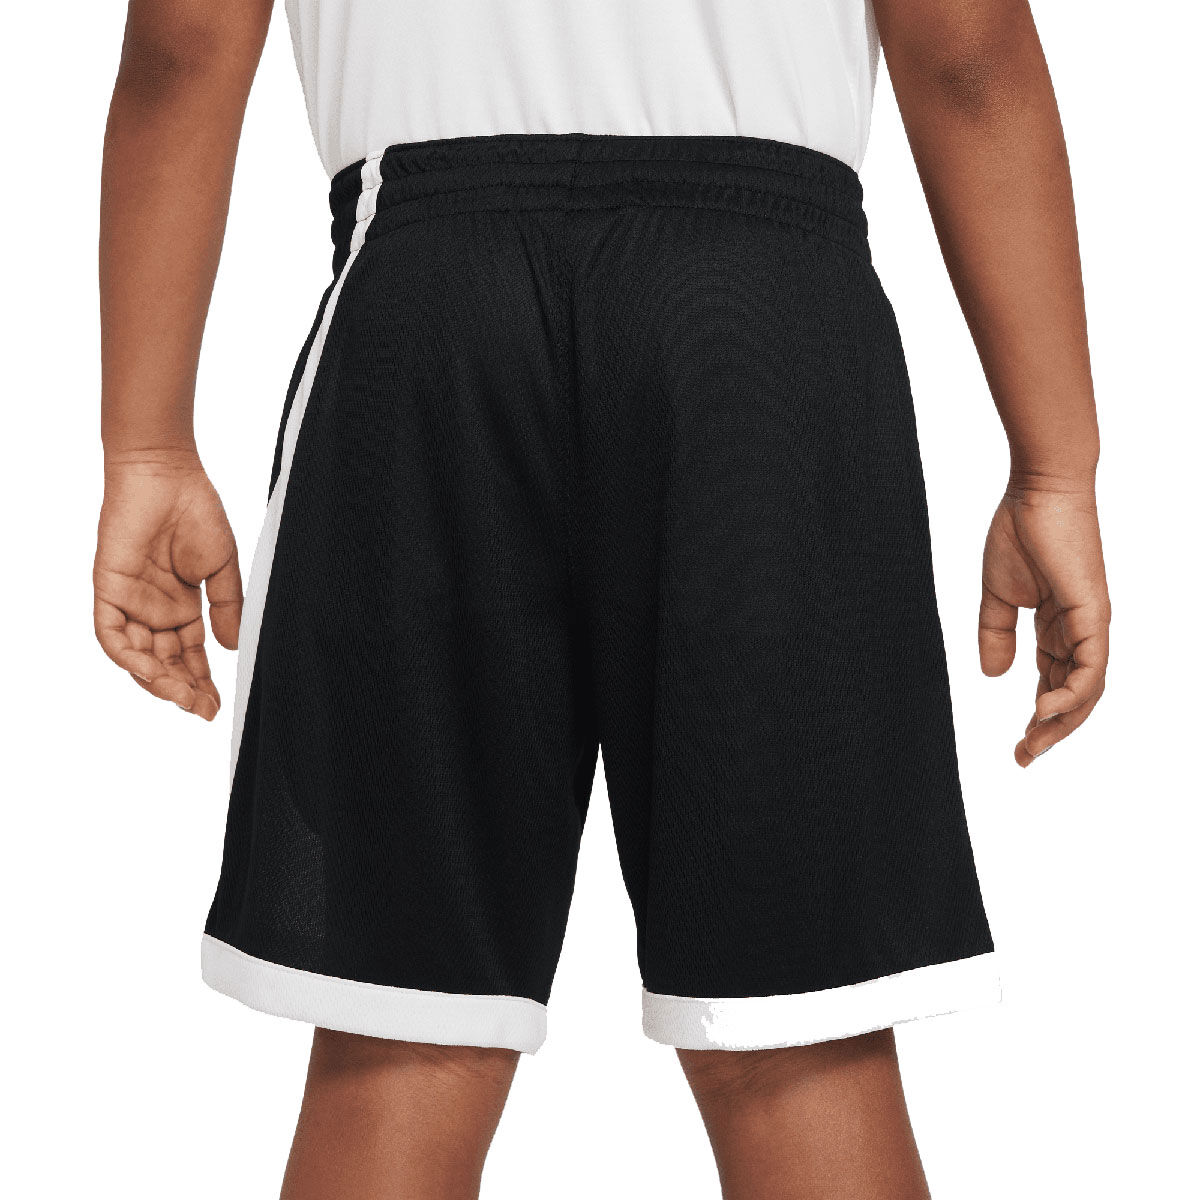 Kinetic American Flame Basketball Shorts Quick Dried Designer